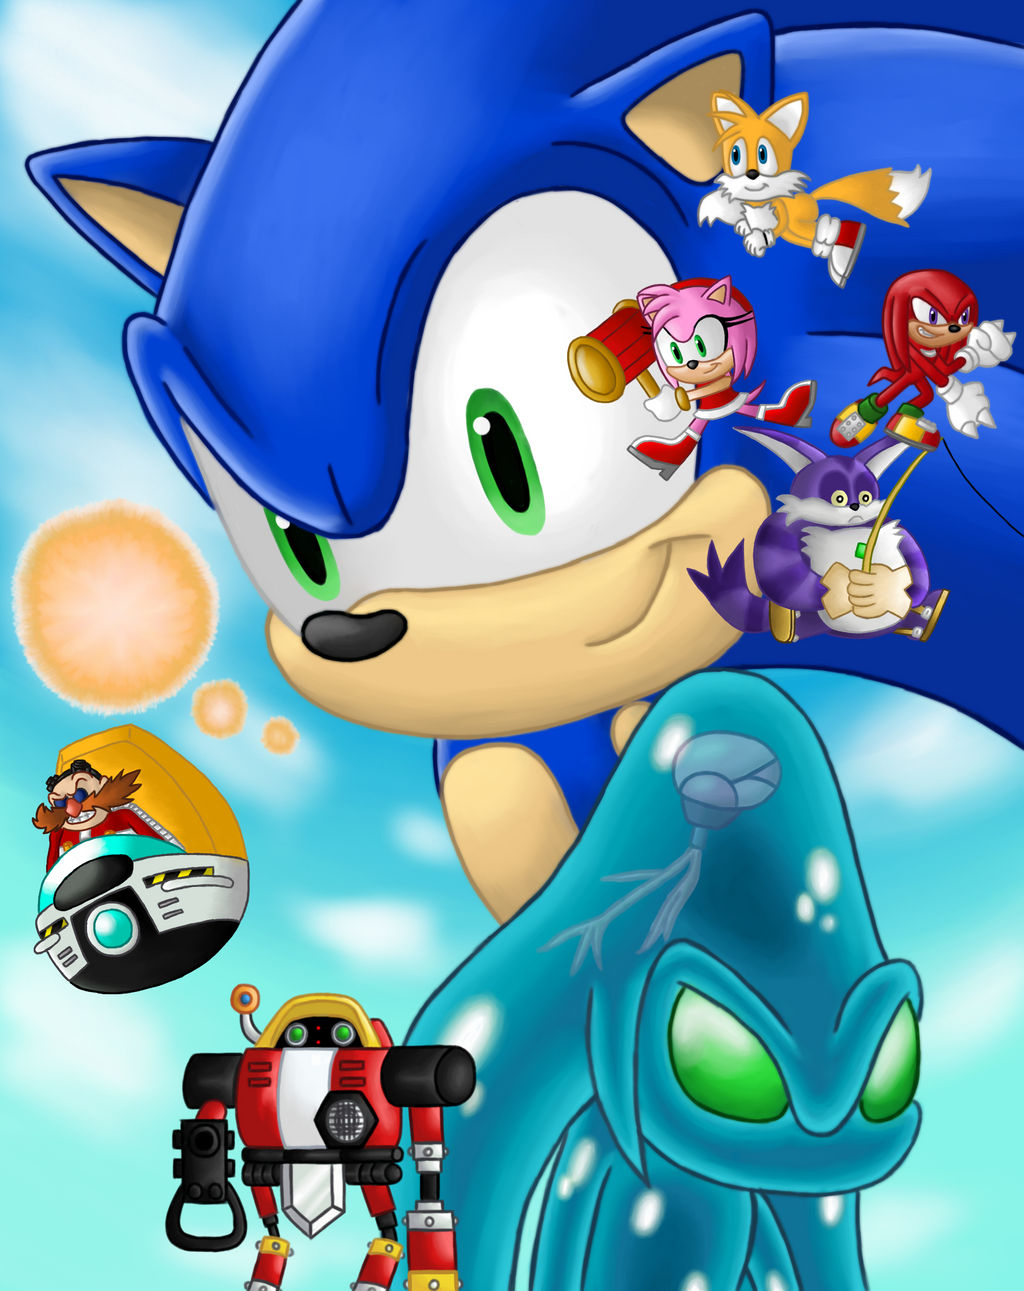 Sonic Movie Poster Cel-Shaded by andrewk on DeviantArt